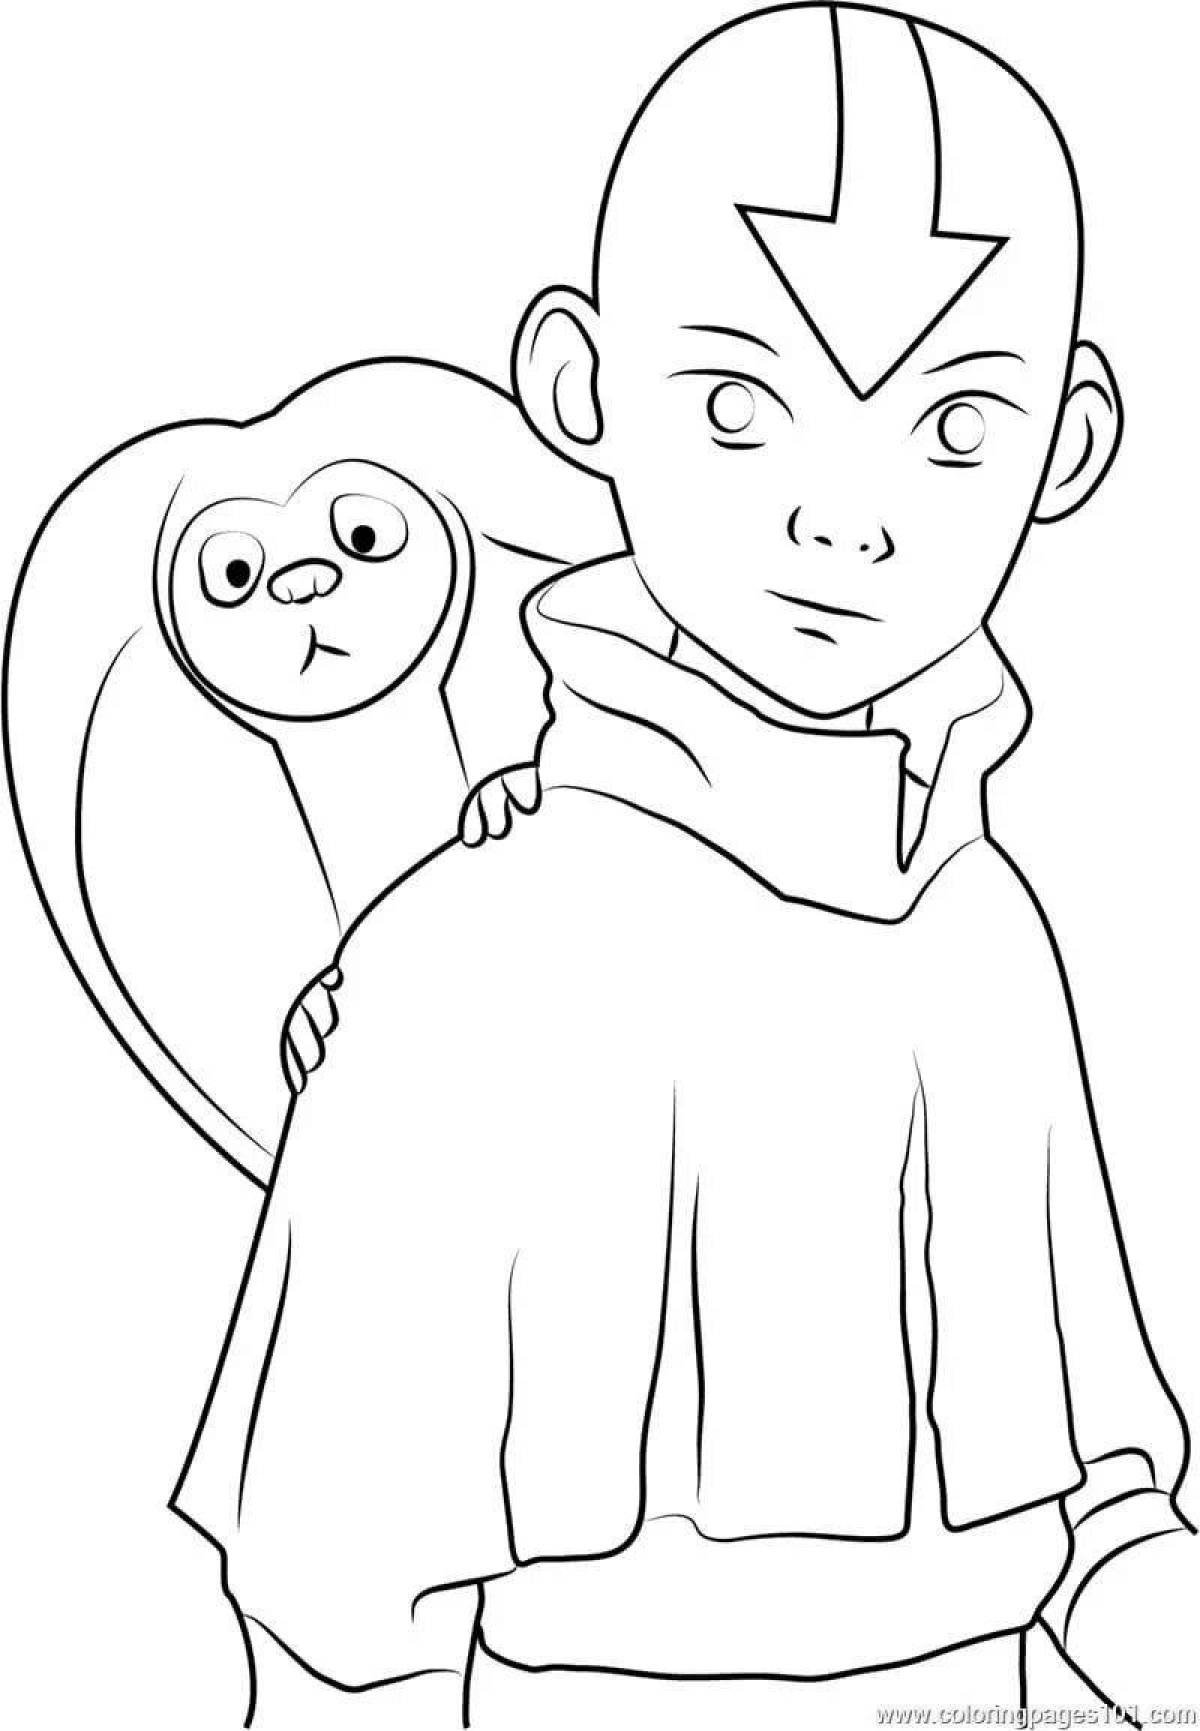 Awesome Avatar: The Last Airbender Coloring Page